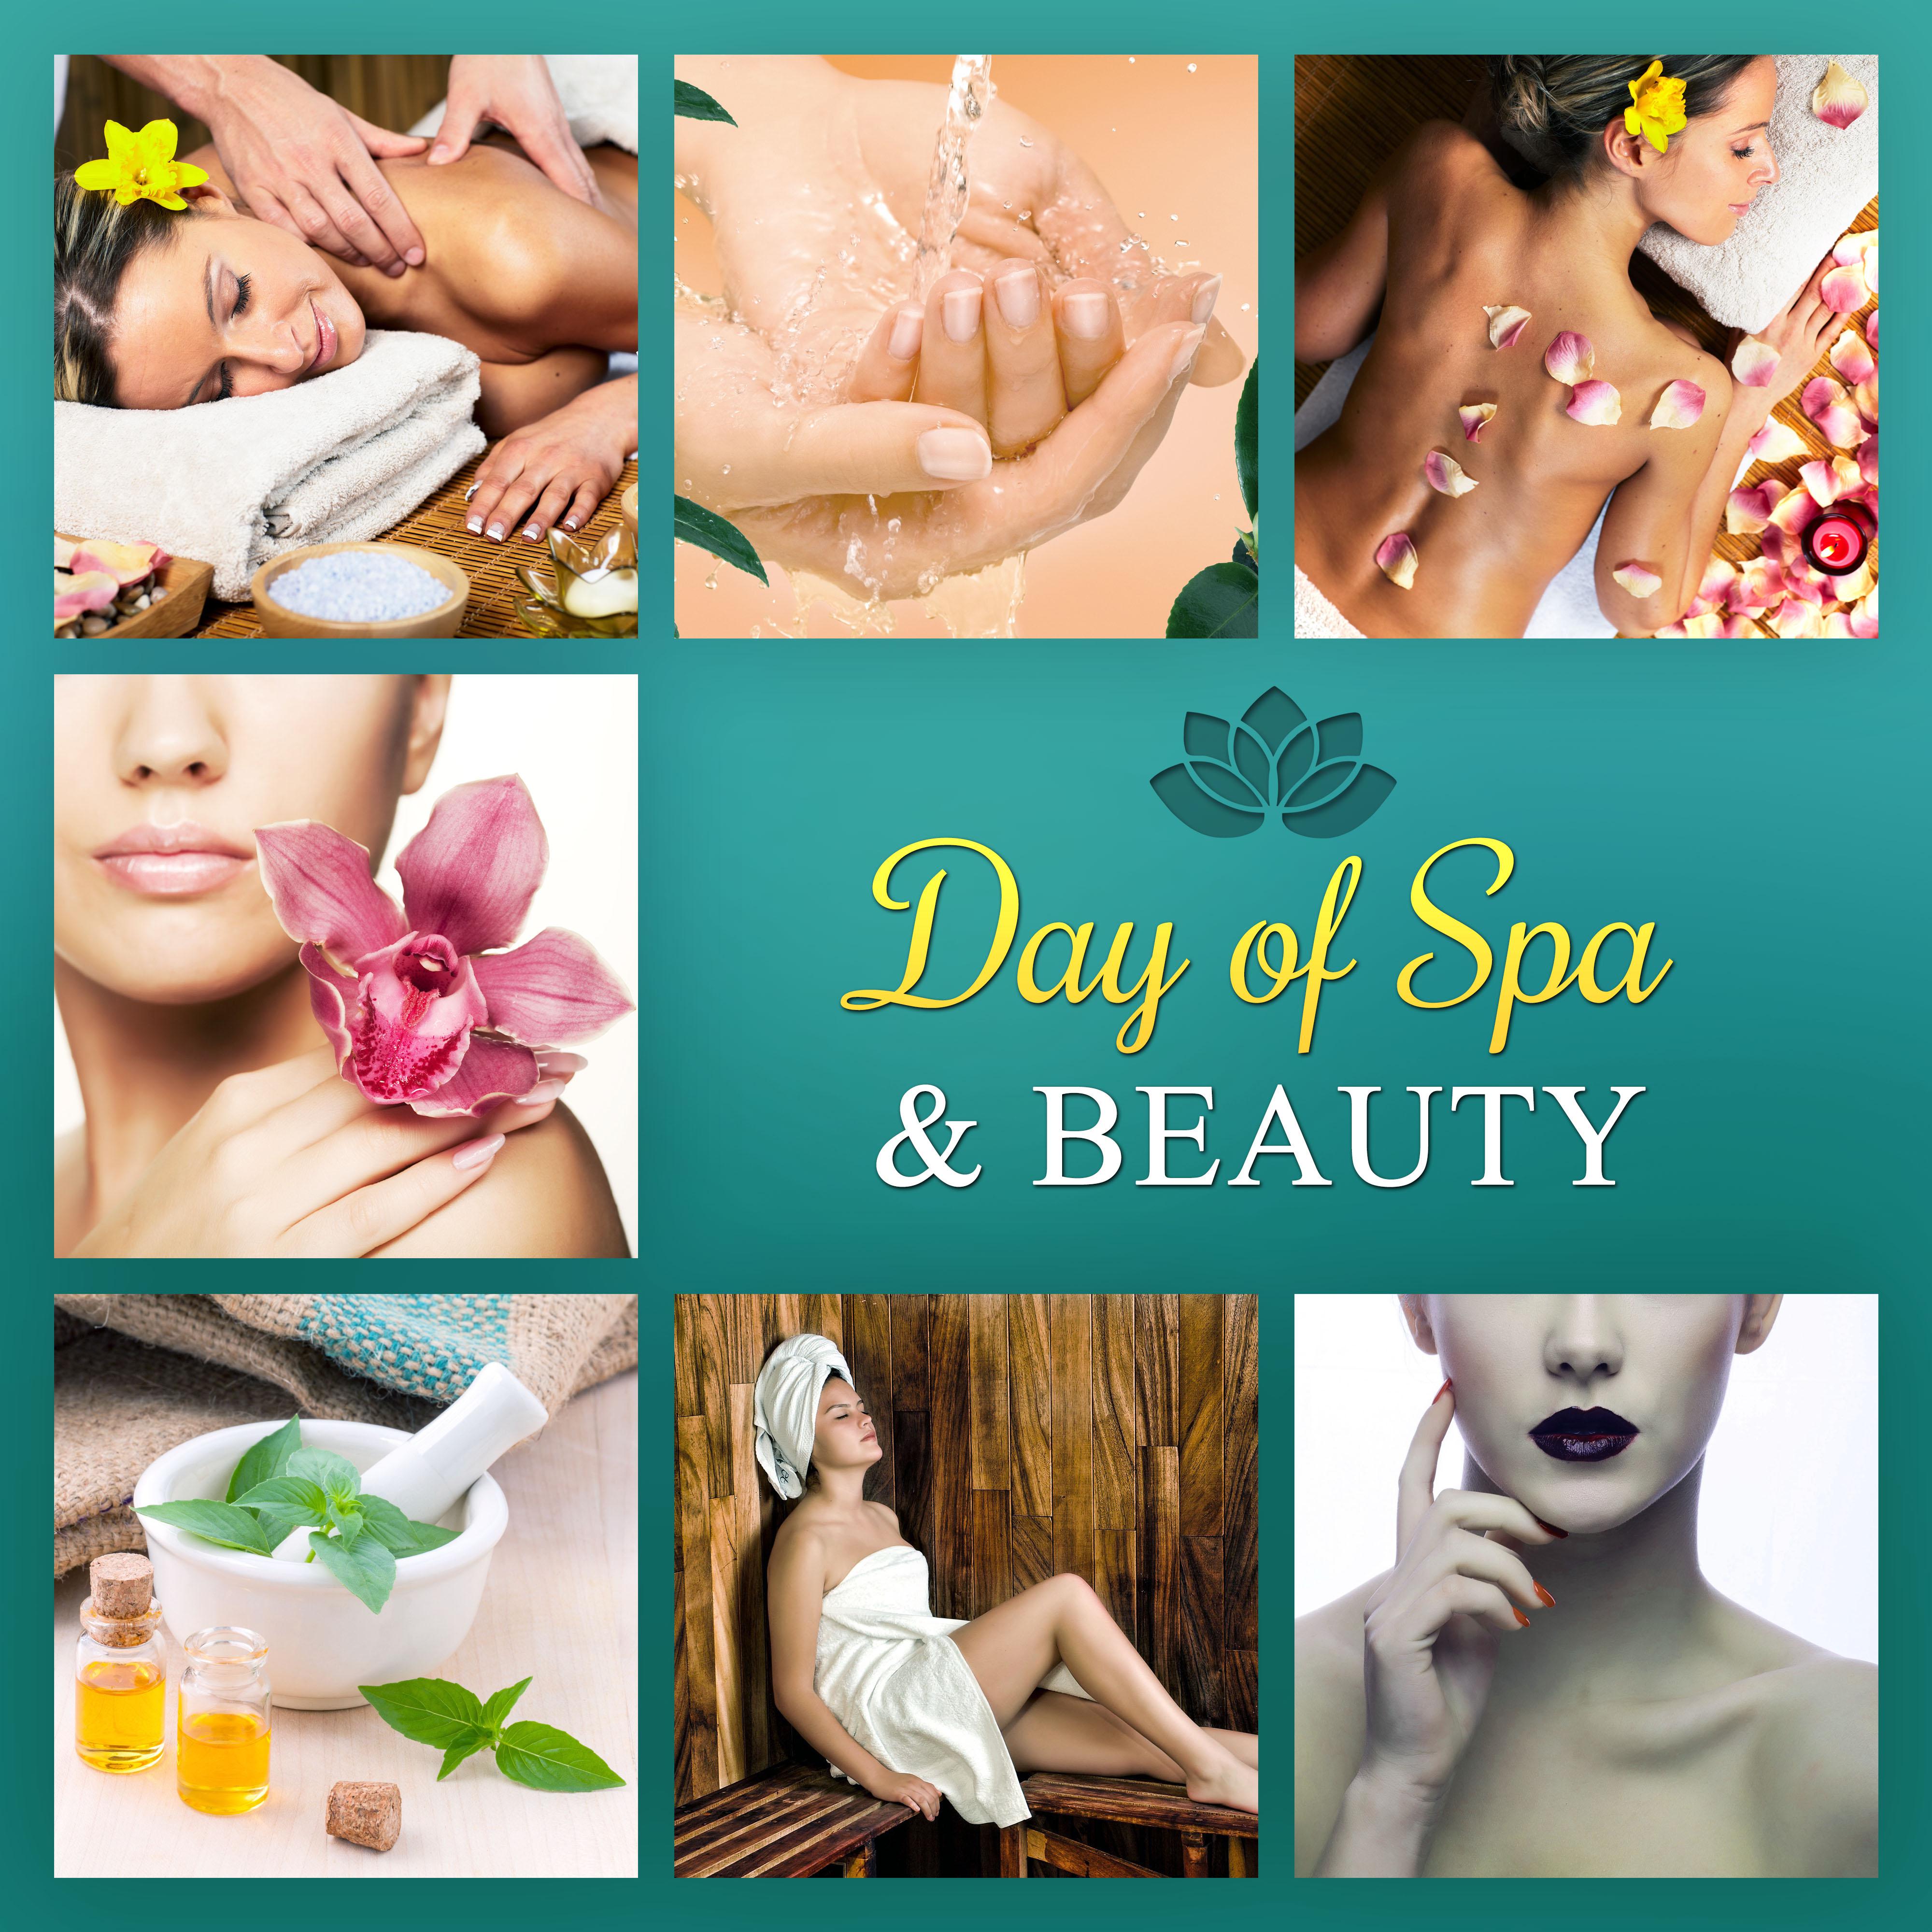 Day of Spa  Beauty  New Age Music for Relaxation while Spa  Wellness Treatments, Best Background to Massage, Sauna, Sound Therapy